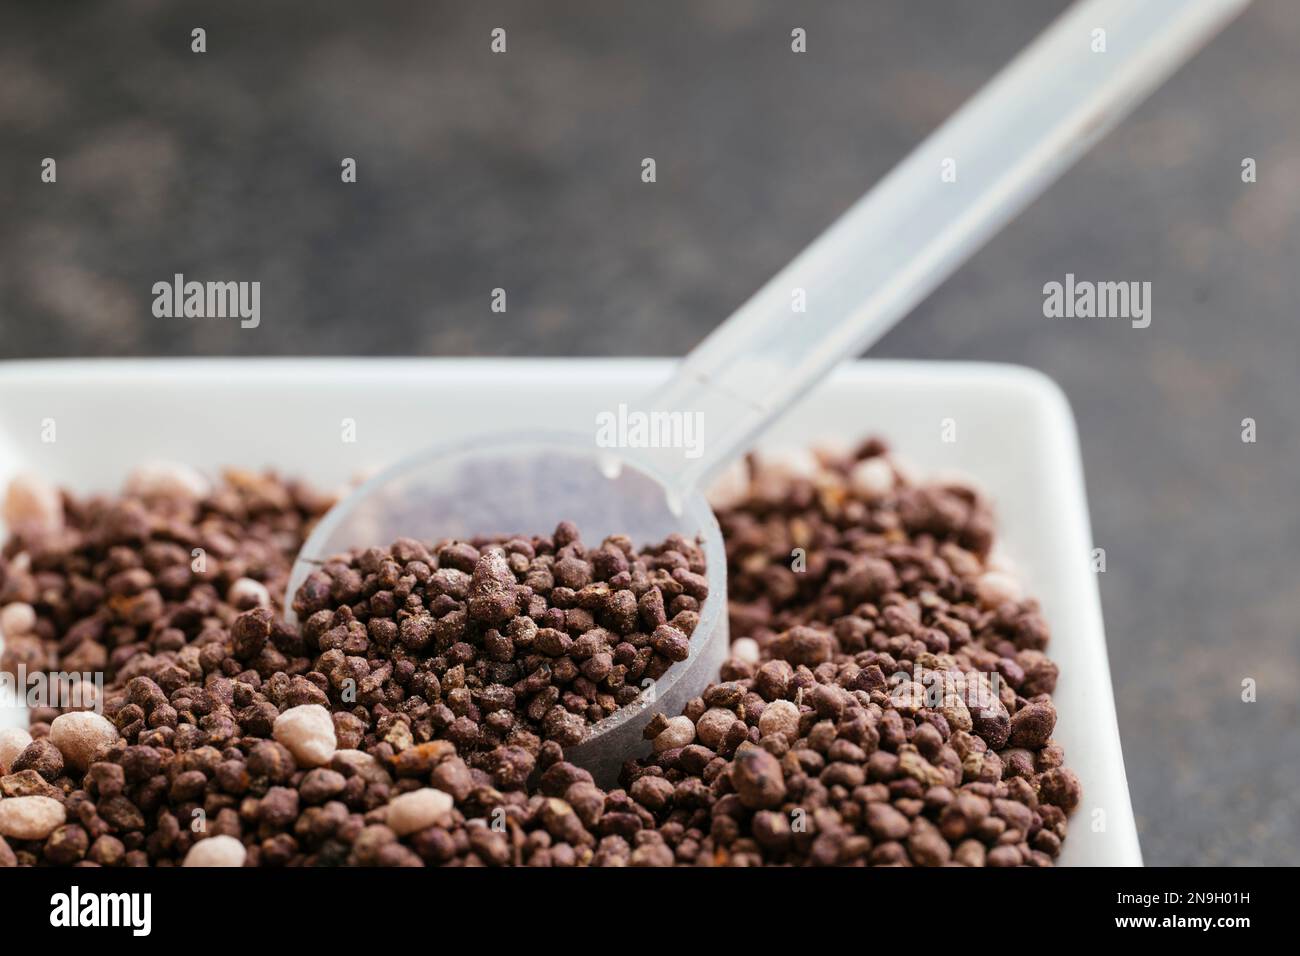 Organic NPK fertiliser for herbs and seedlings with a measuring spoon Stock Photo